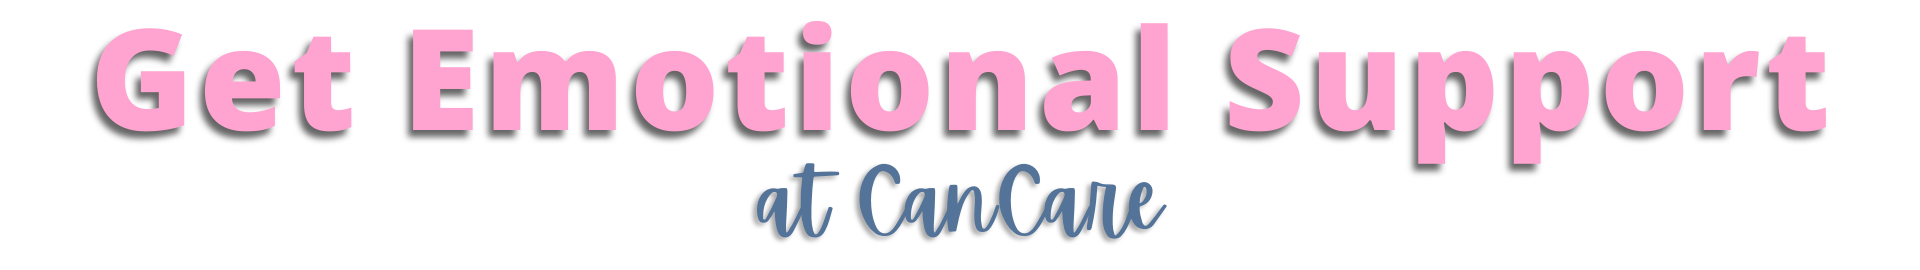 Get emotional support at Cancare